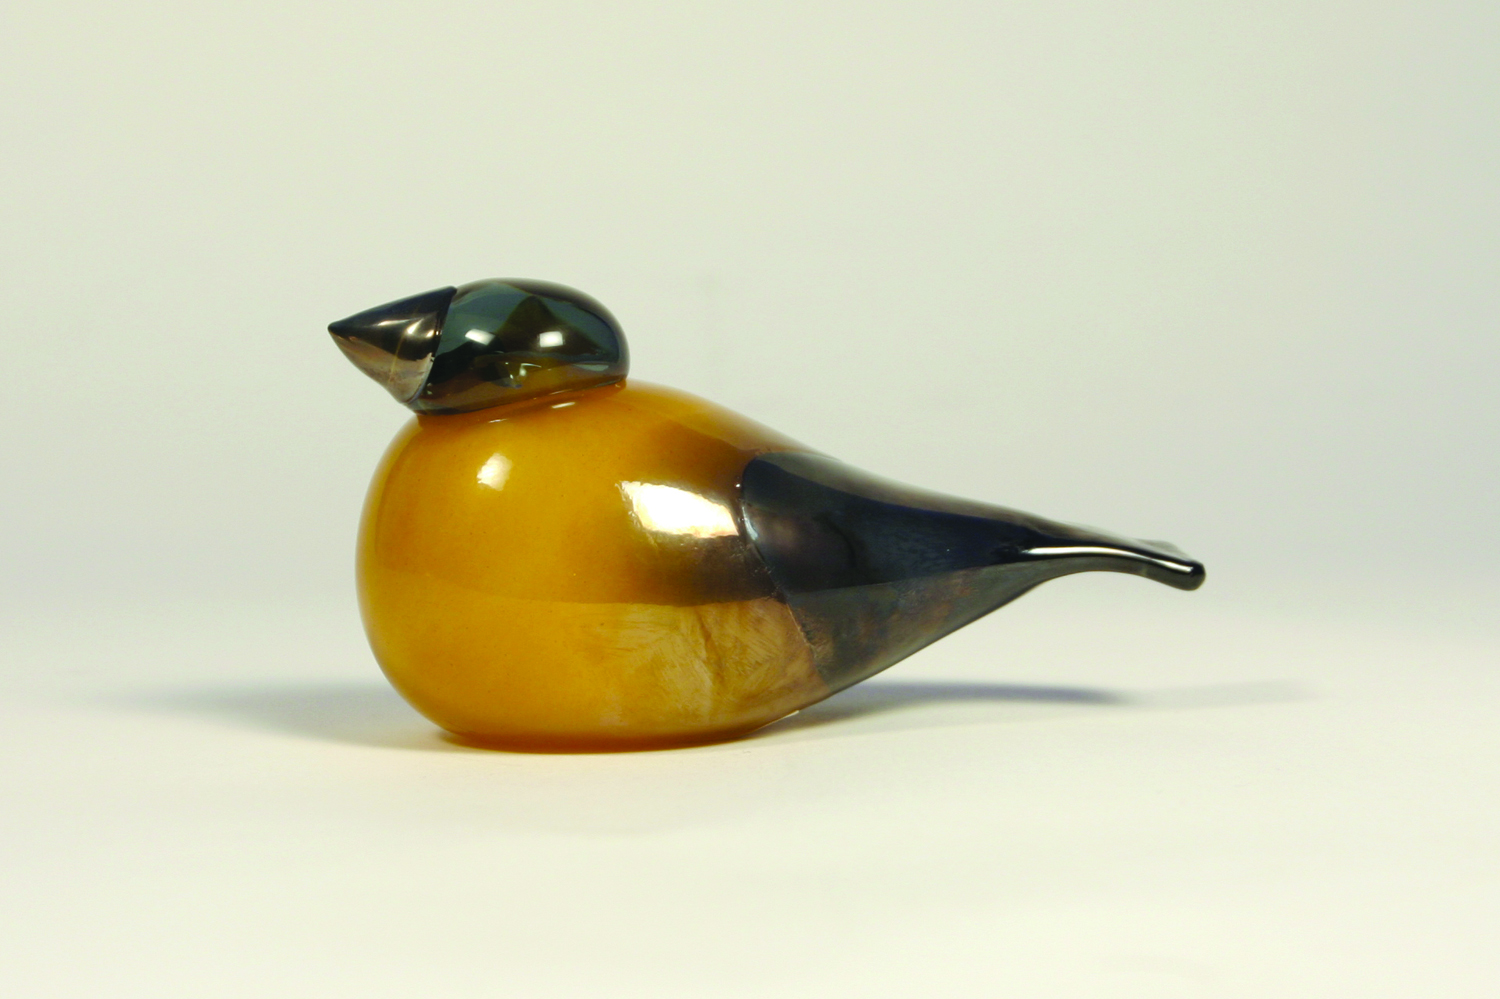  Designed by Oiva Toikka (Finnish, born 1931).&nbsp; American Goldfinch,  2004.&nbsp;Blown glass;&nbsp;2 3/4 x 5 1/2 x 2 7/8 in. Collection of Museum of Glass, Tacoma, Washington, Museum purchase from Iittala, Inc. Photo courtesy of Iittala, Inc. 